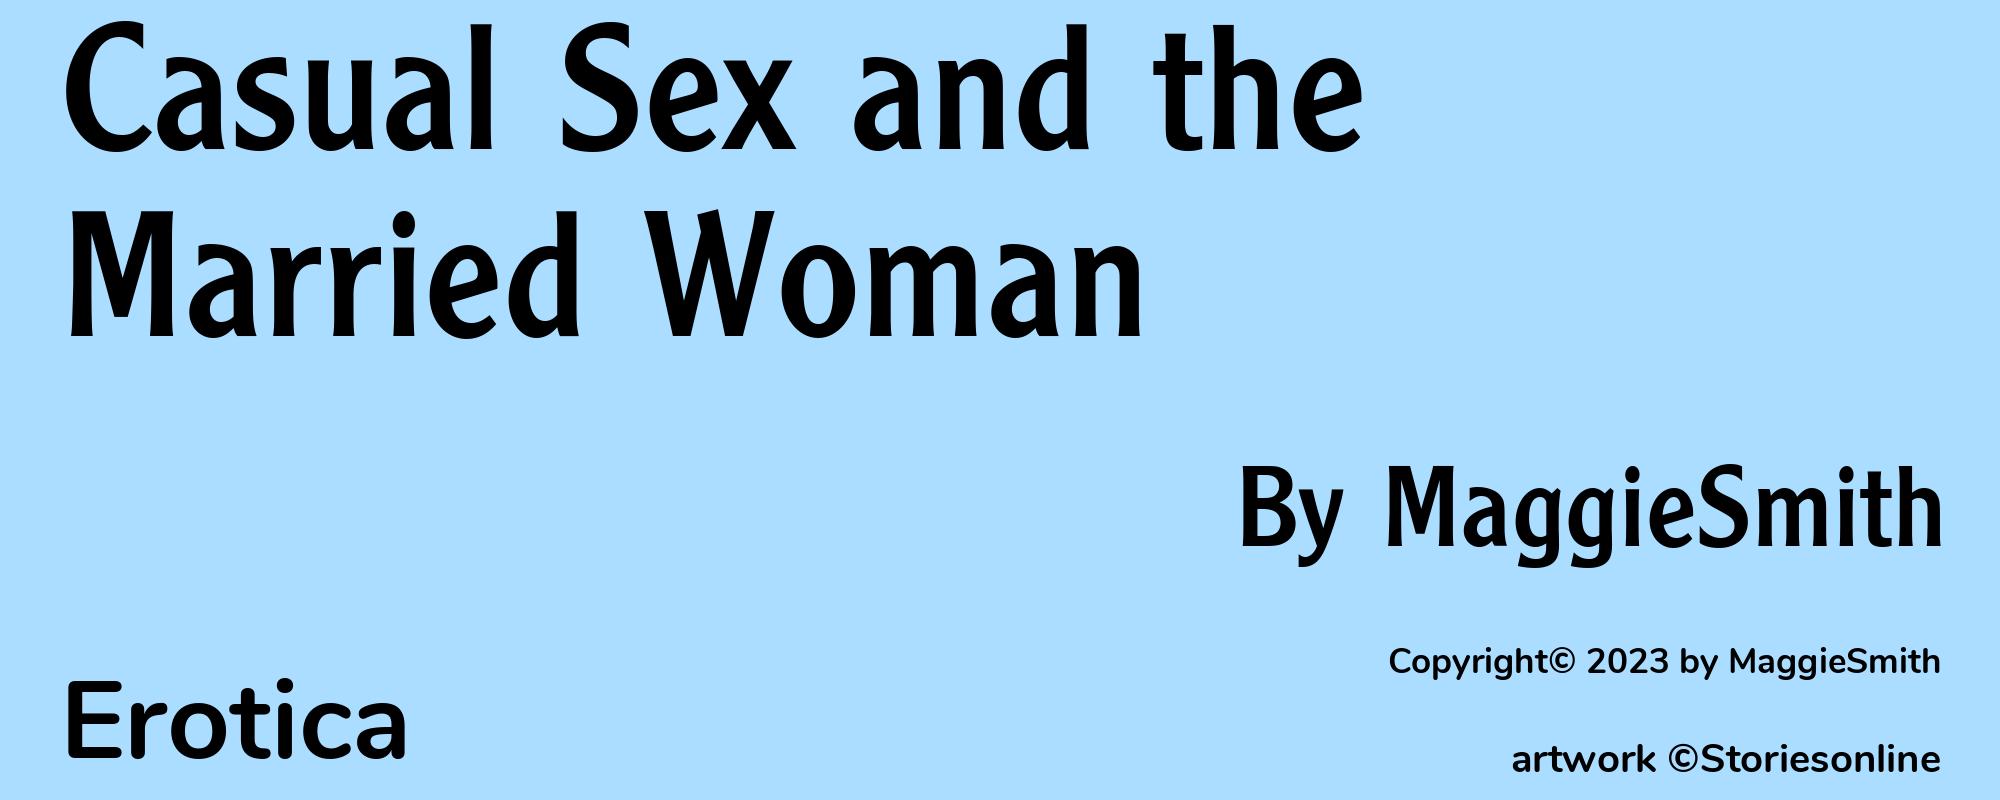 Casual Sex and the Married Woman - Cover